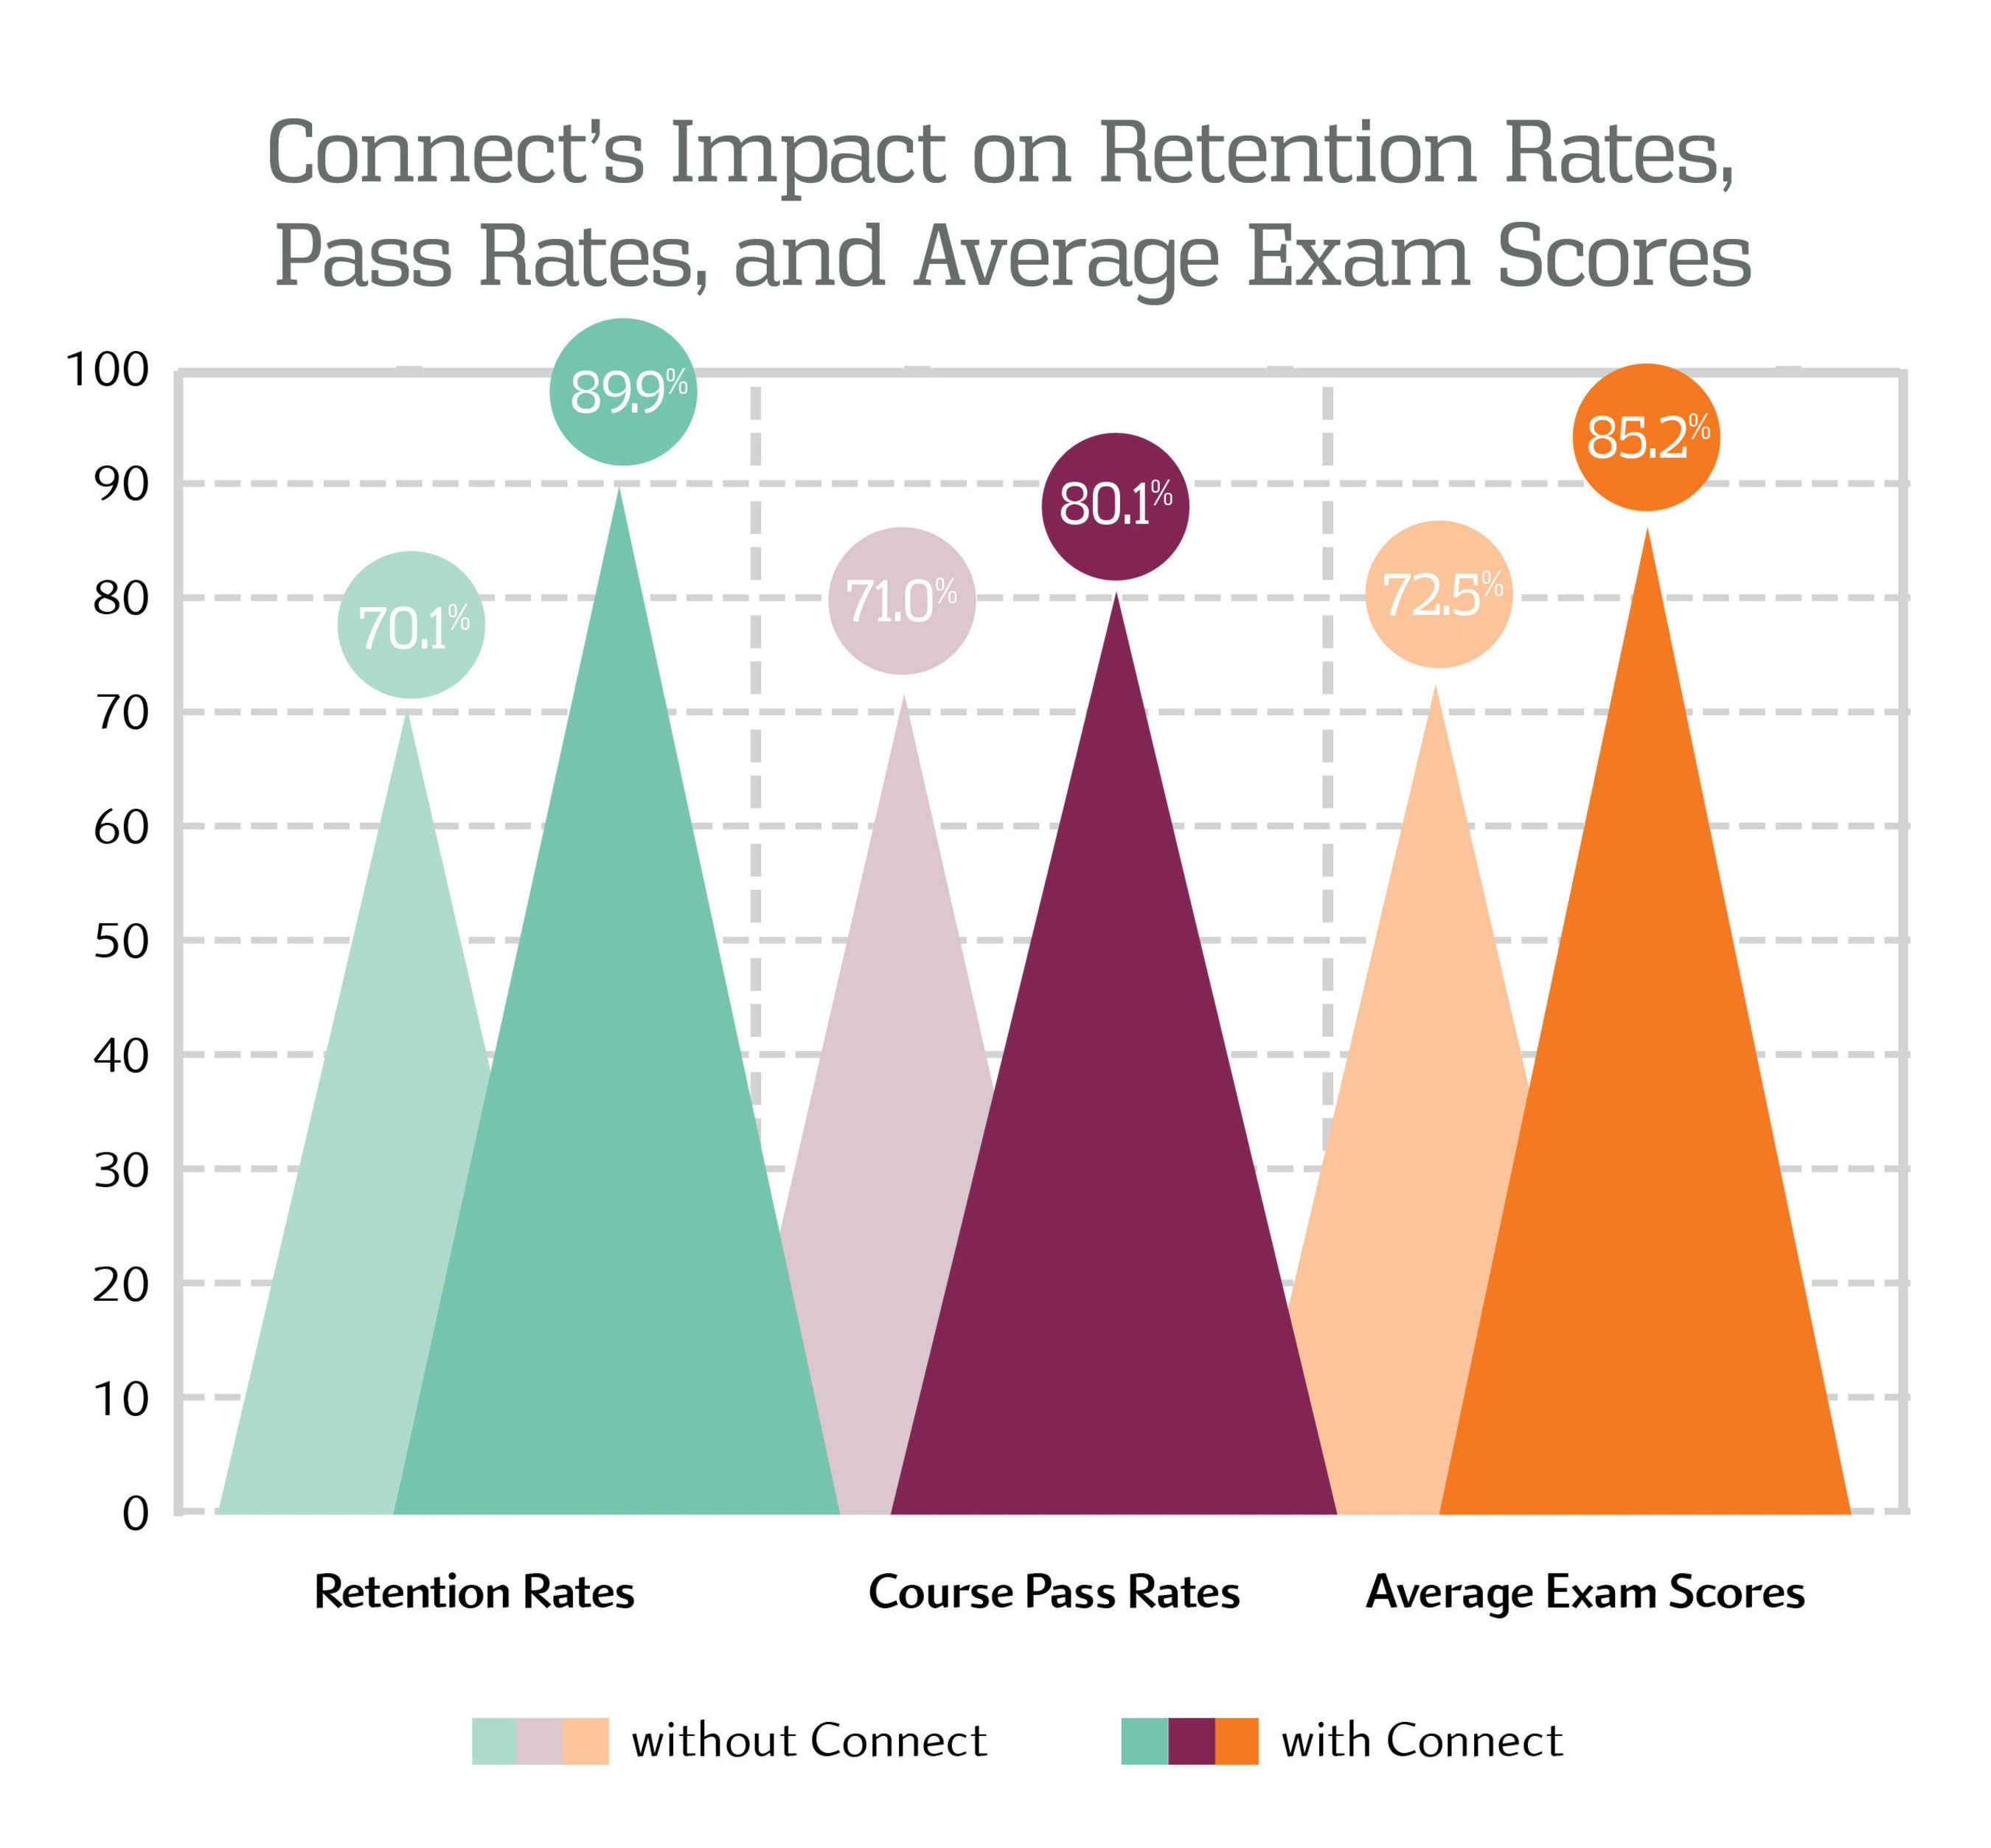 Connect's Impact on Retention Rates, Pass Rates, and Average Exam Scores